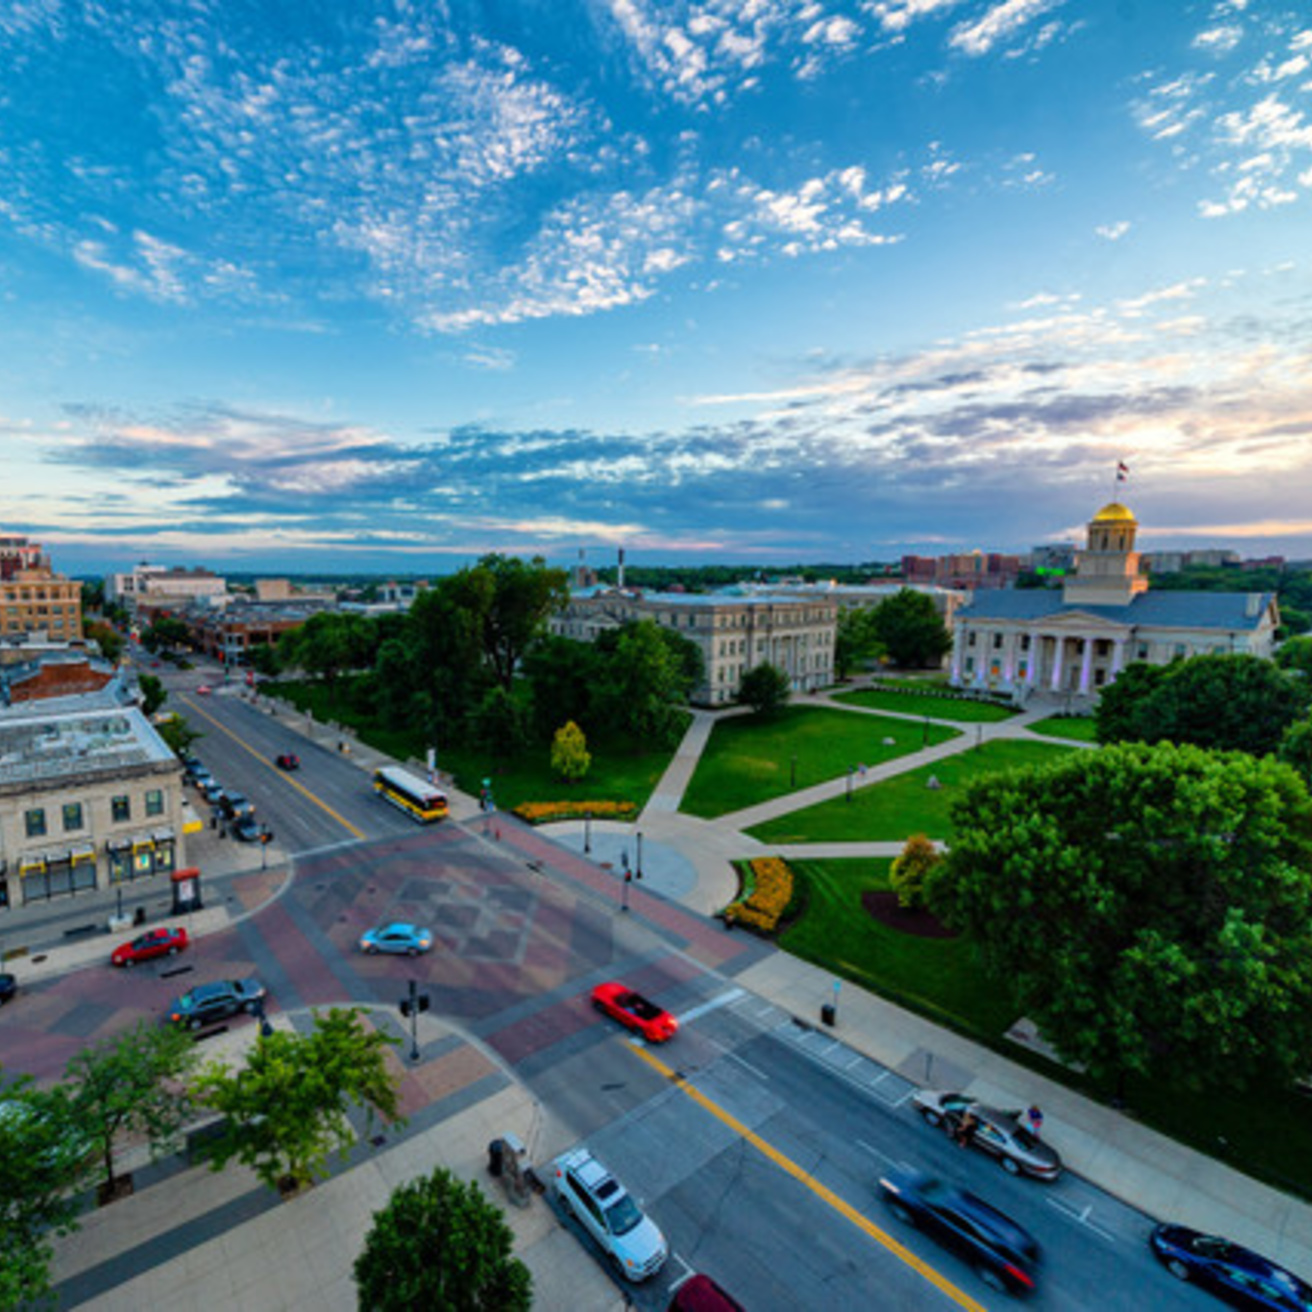 Contact Us | Admissions - The University of Iowa